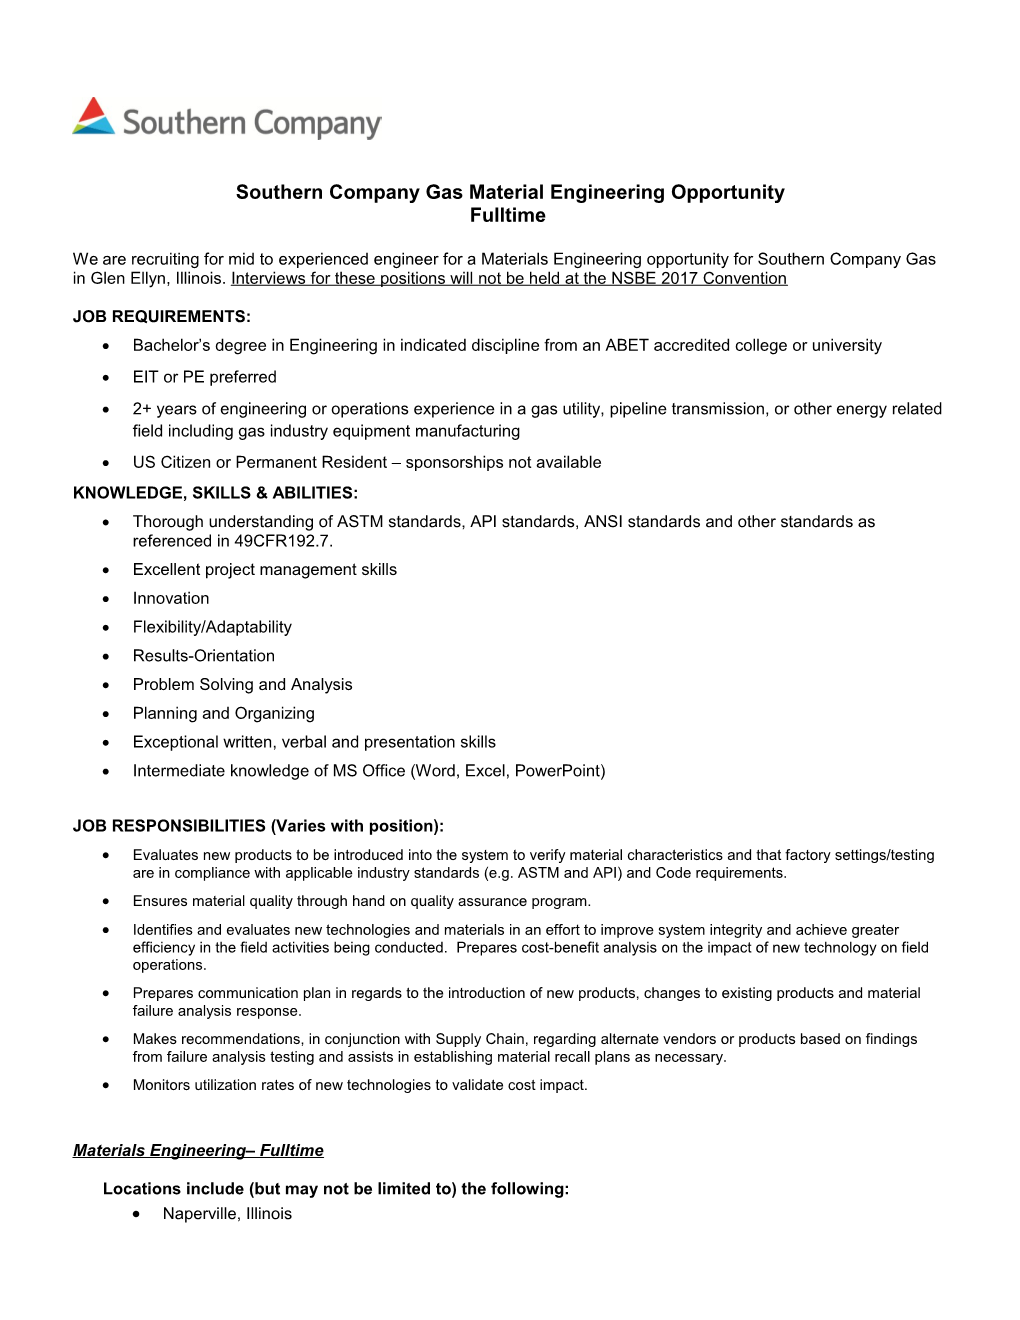 Southern Company Gas Material Engineering Opportunity